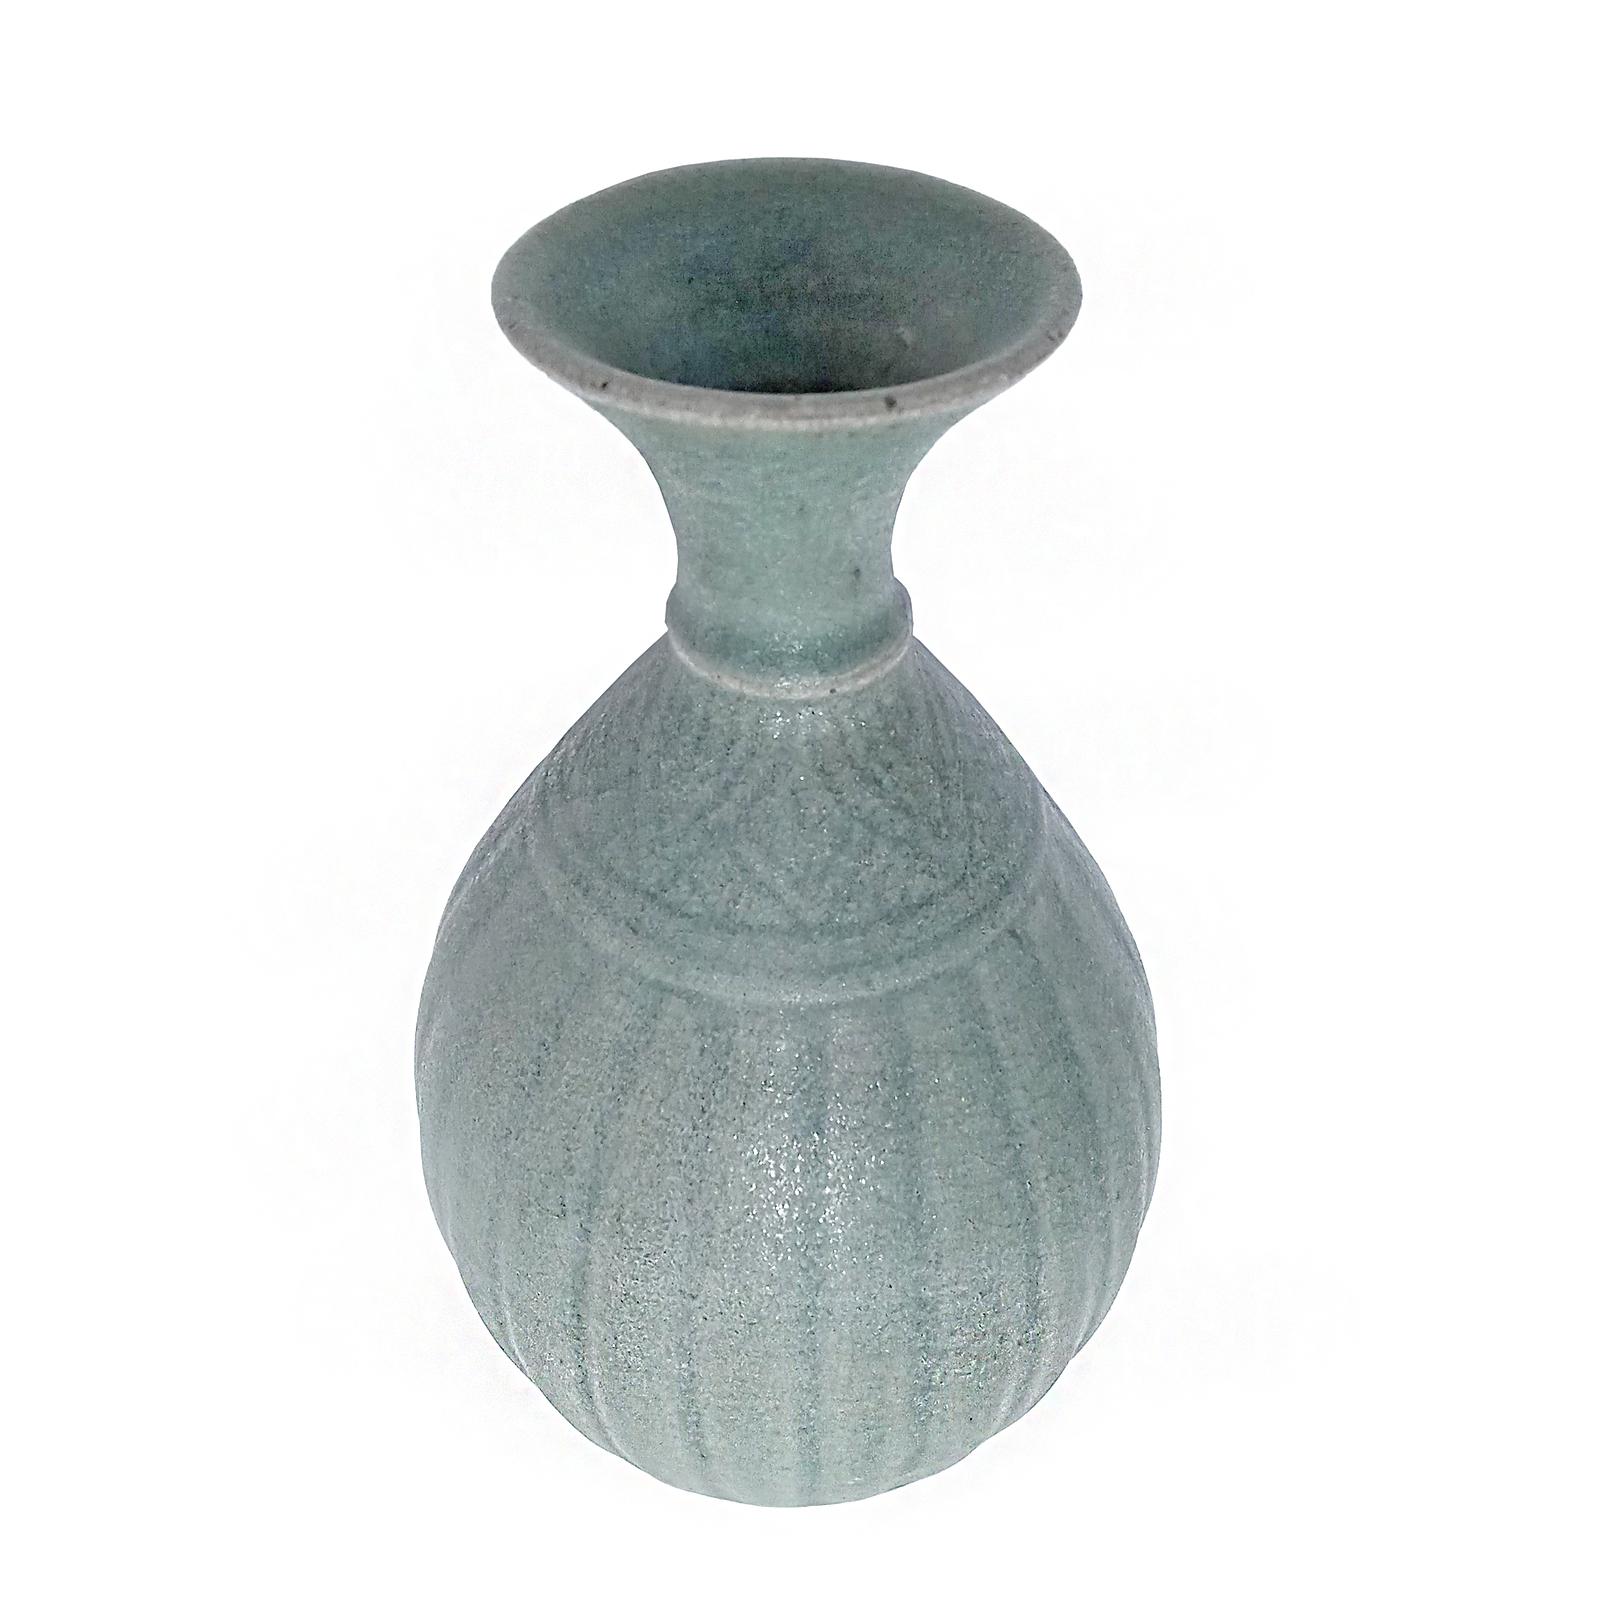 A beautiful Celadon vase from Thailand, late 19th Century. 

While the golden age of Thai ceramics ended around the 15-16th Centuries, Thai artisans transmitted the craft through generations, later producing smaller numbers of pieces with different